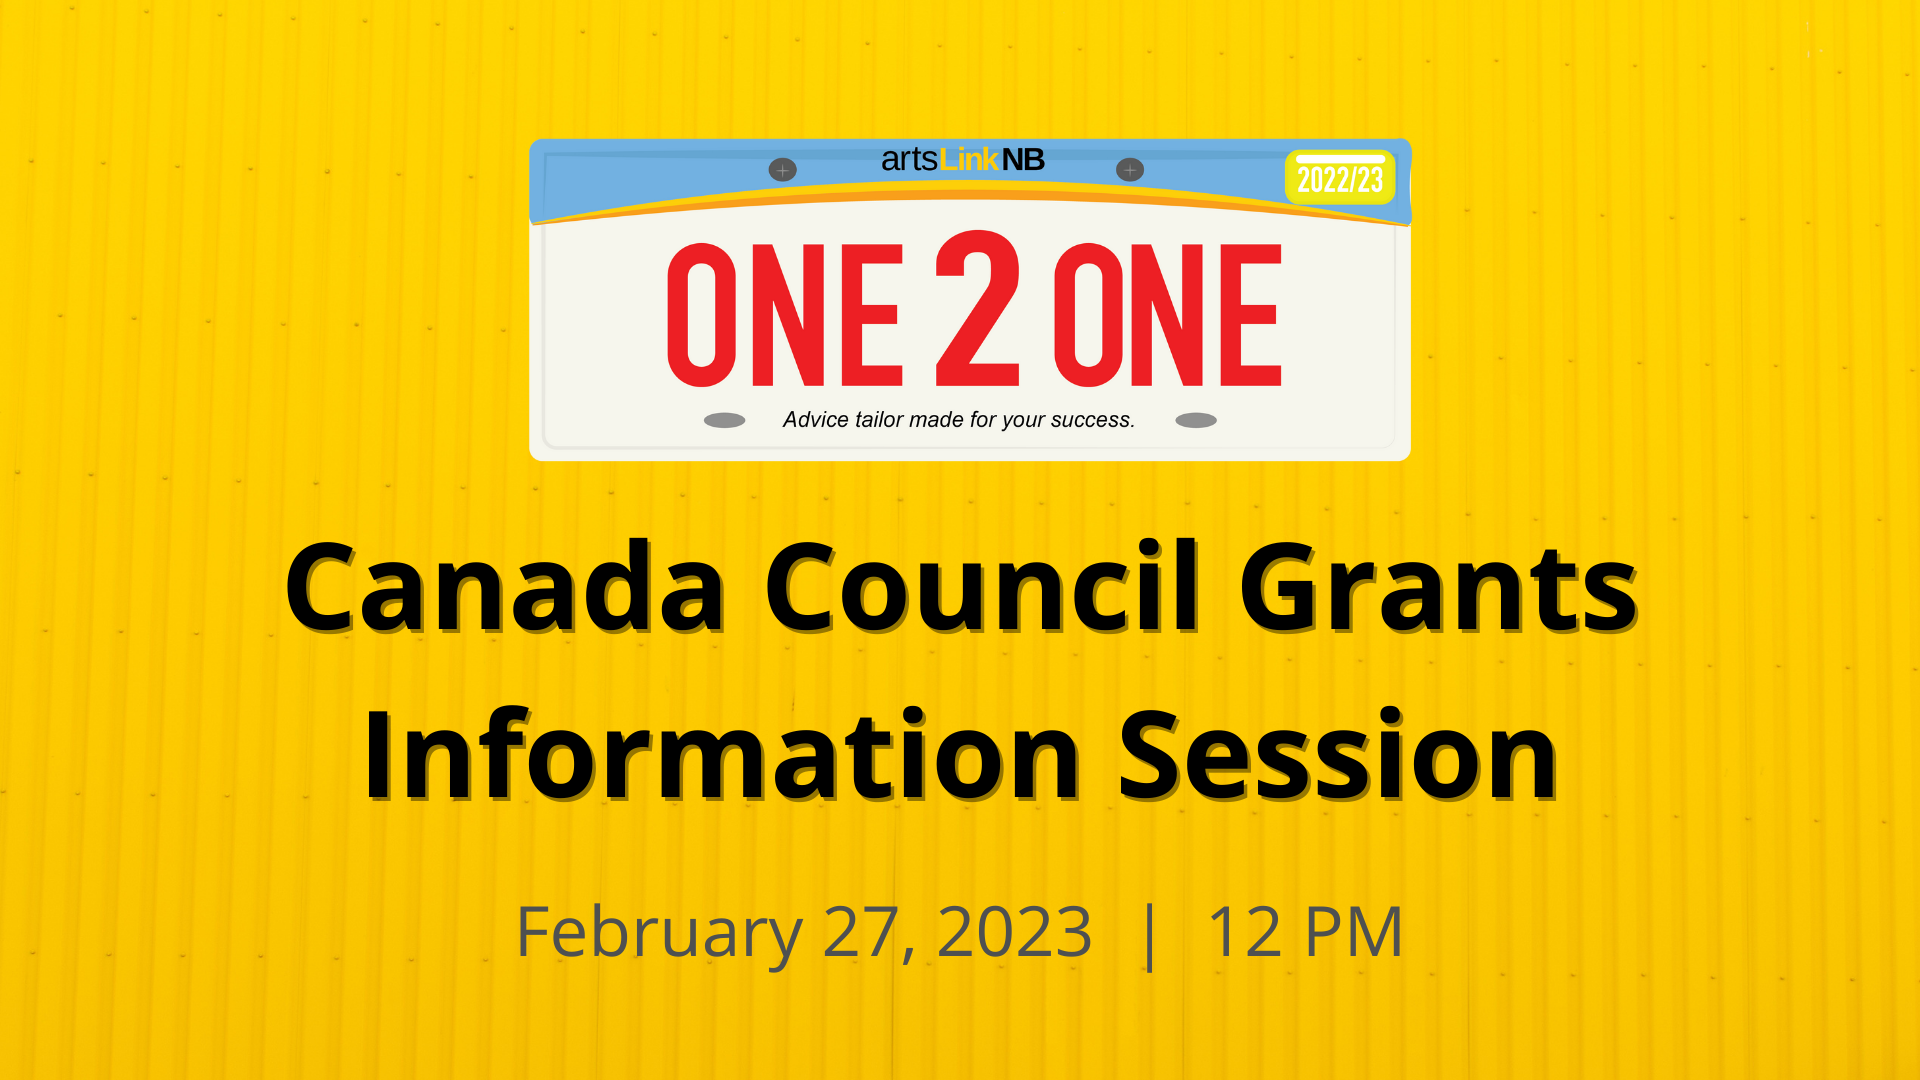 Image of a licence plate with the words "ArtsLink NB One 2 One: Advice tailor made for your success" written on it. Additional text reads: Canada Council Grants Information Session. February 27, 2023, 12 pm